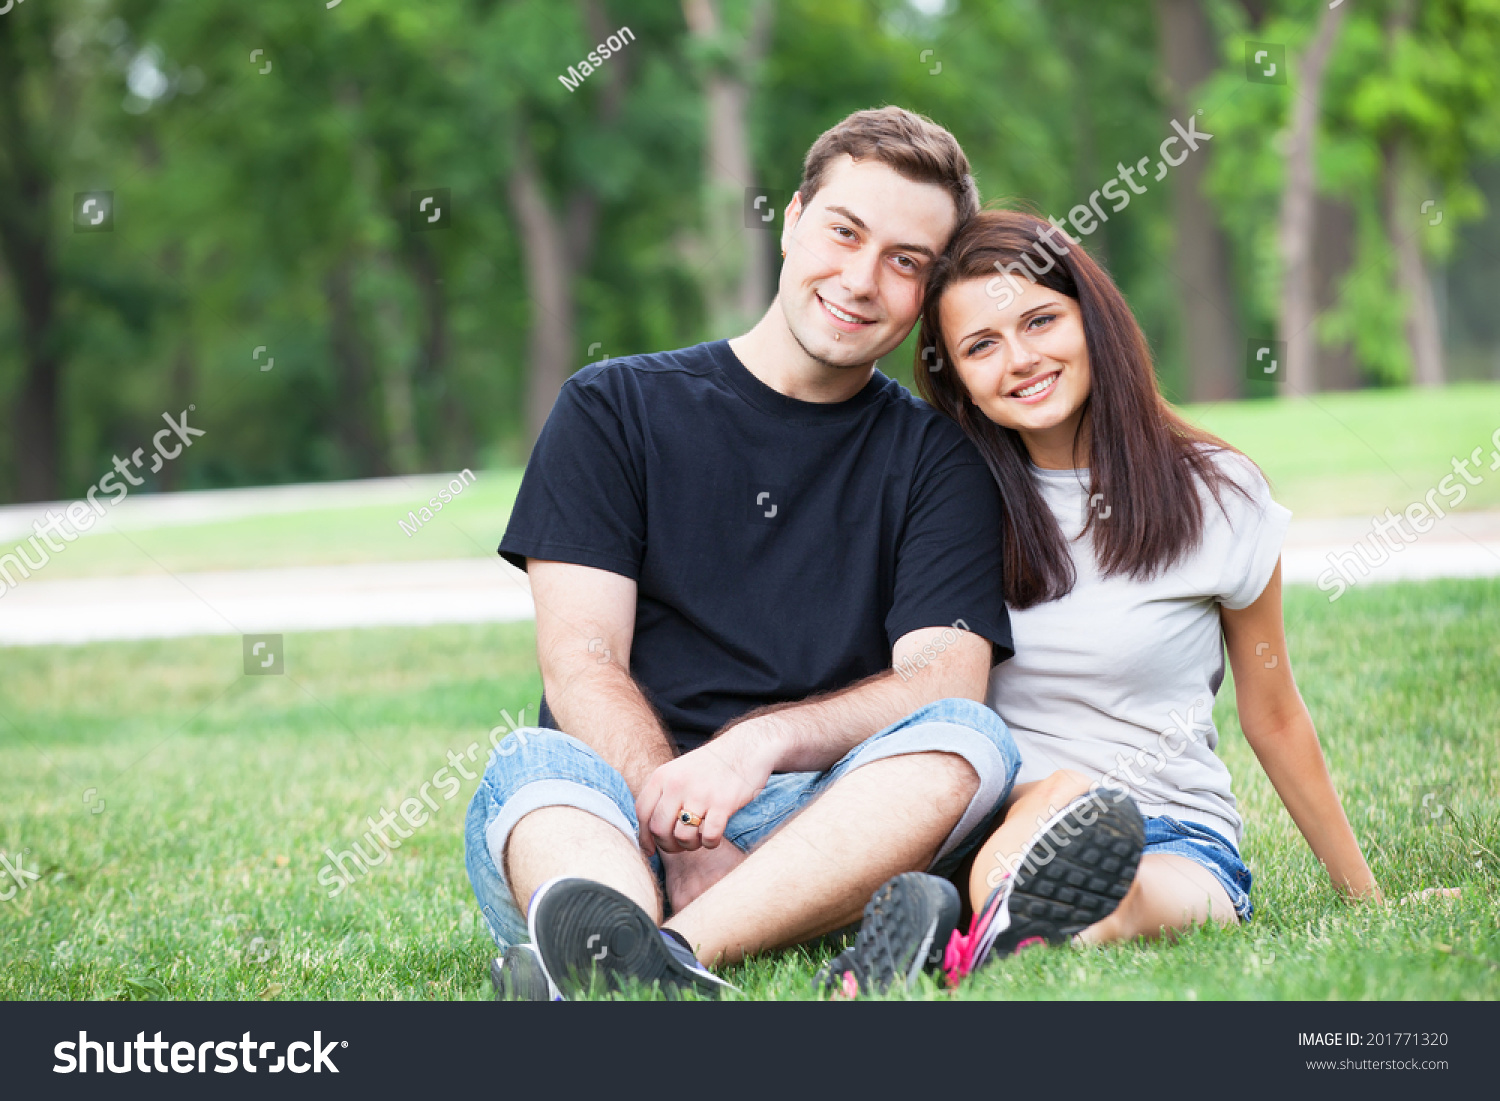 Outdoor couple I